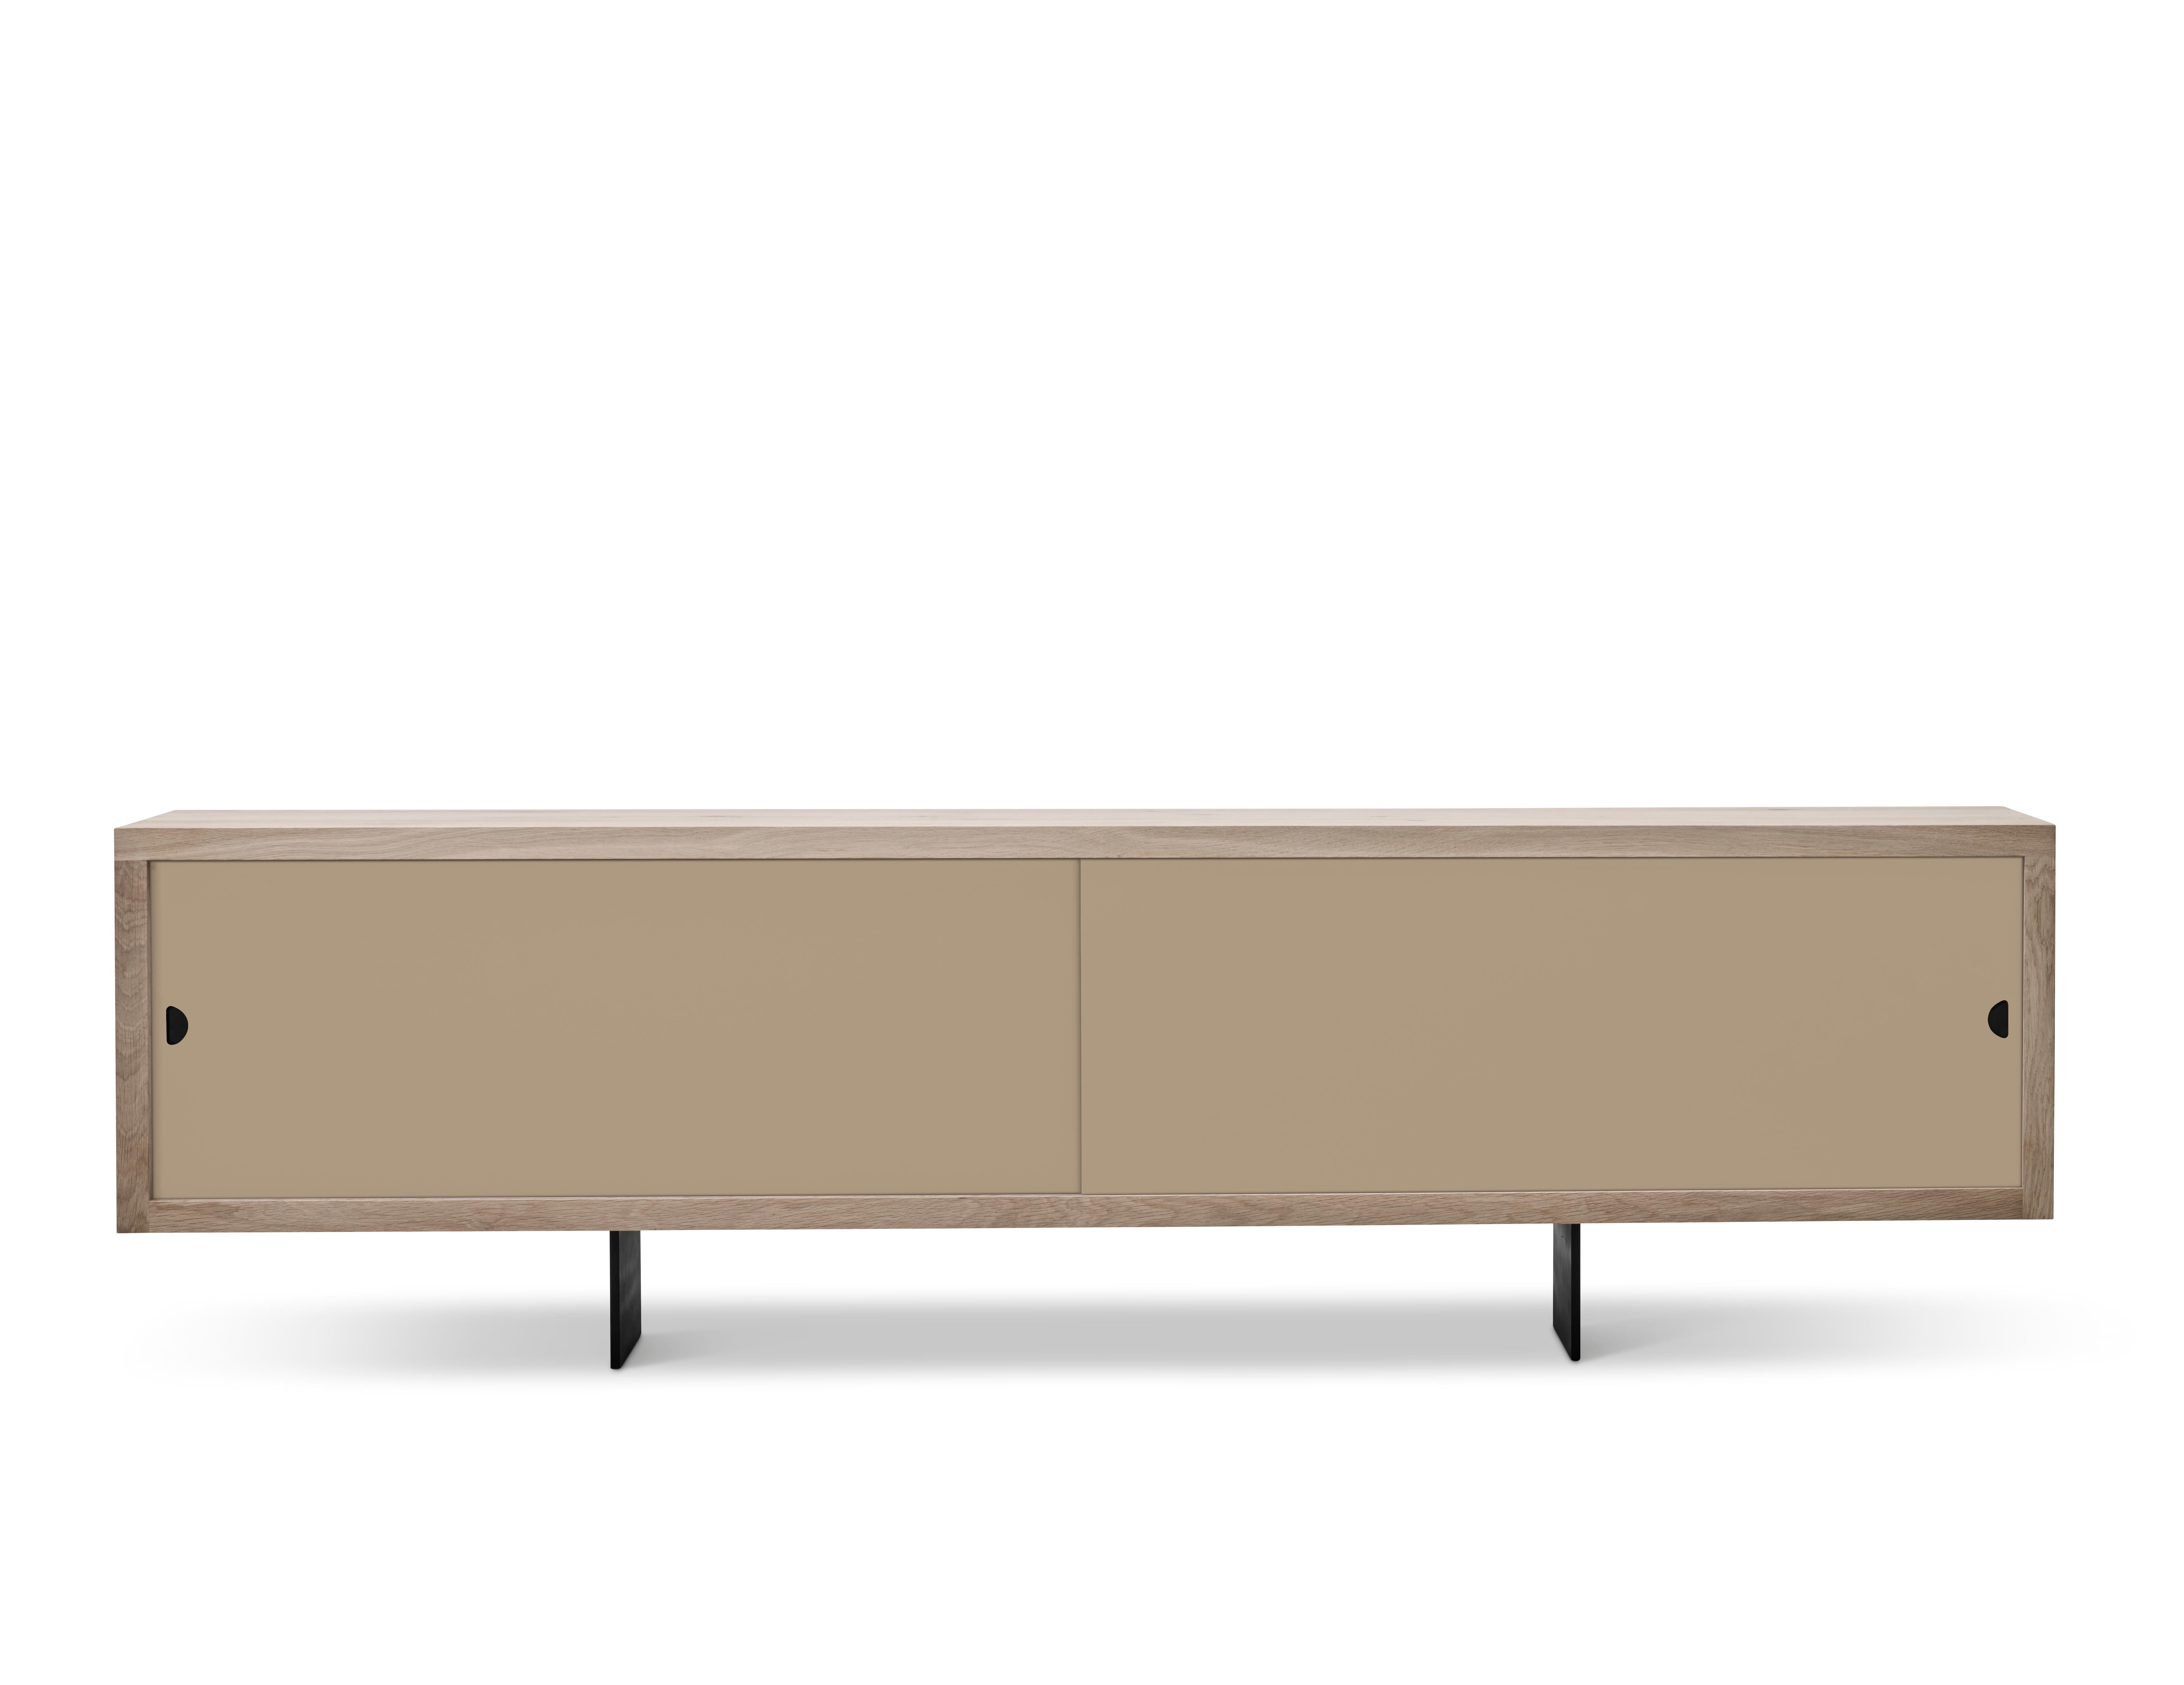 GRAND Sideboard by Jacob Plejdrup for DK3, 2016

Sideboard with sliding doors, available in castoro, beige, black or white.
Model in the picture: Beige
Dimensions: H 68 x 50 x 200

---
dk3 is known for the large plank tables, so it was